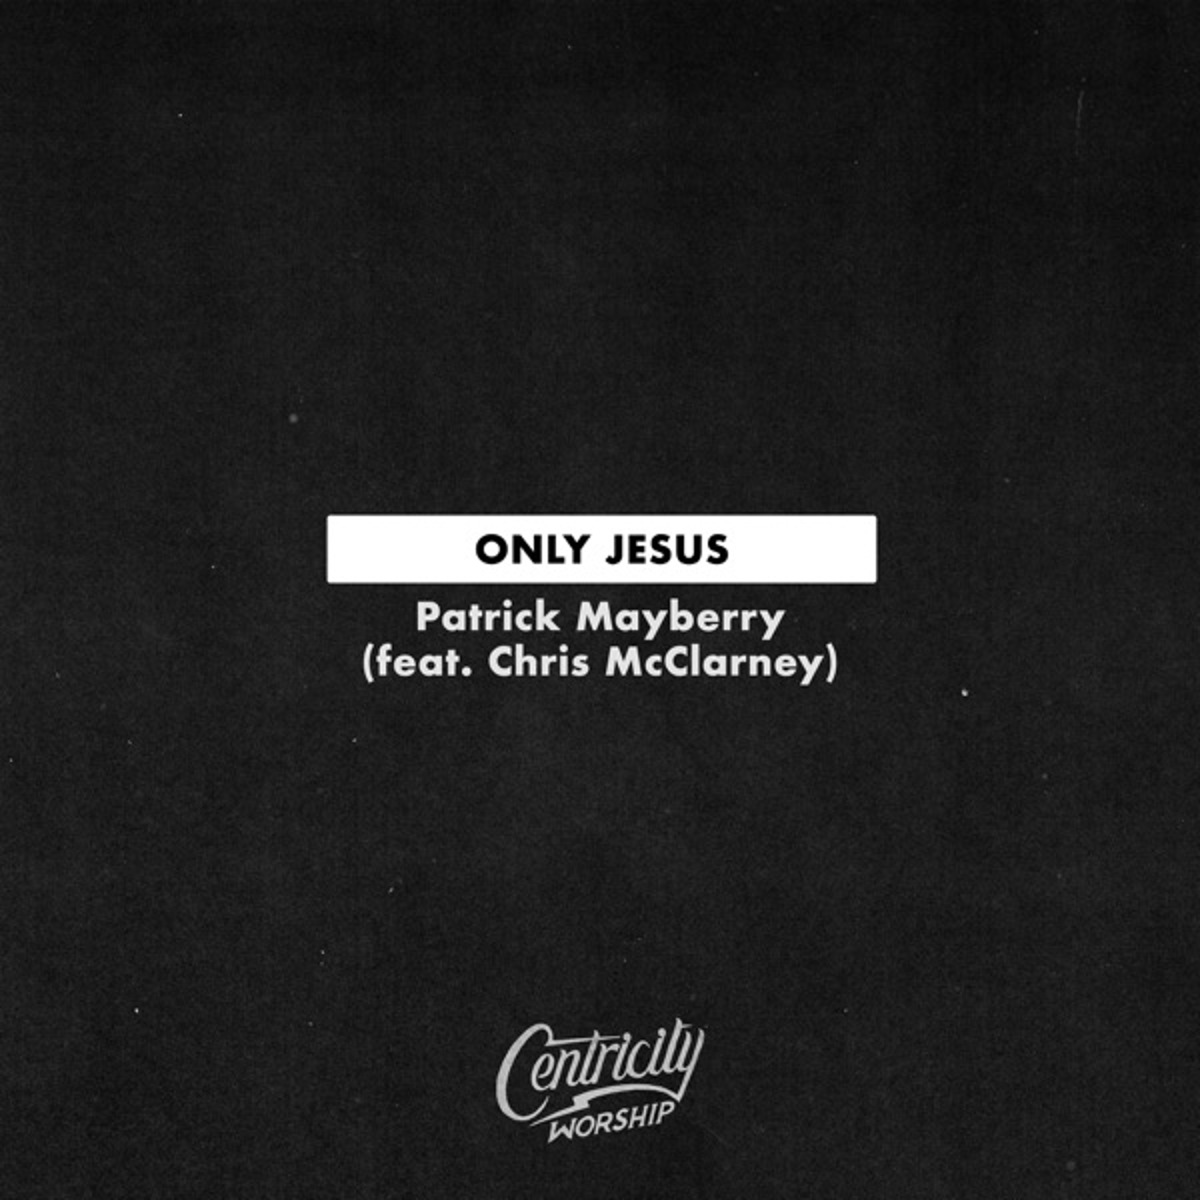 Only Jesus Patrick Mayberry (feat. Chris McClarney)